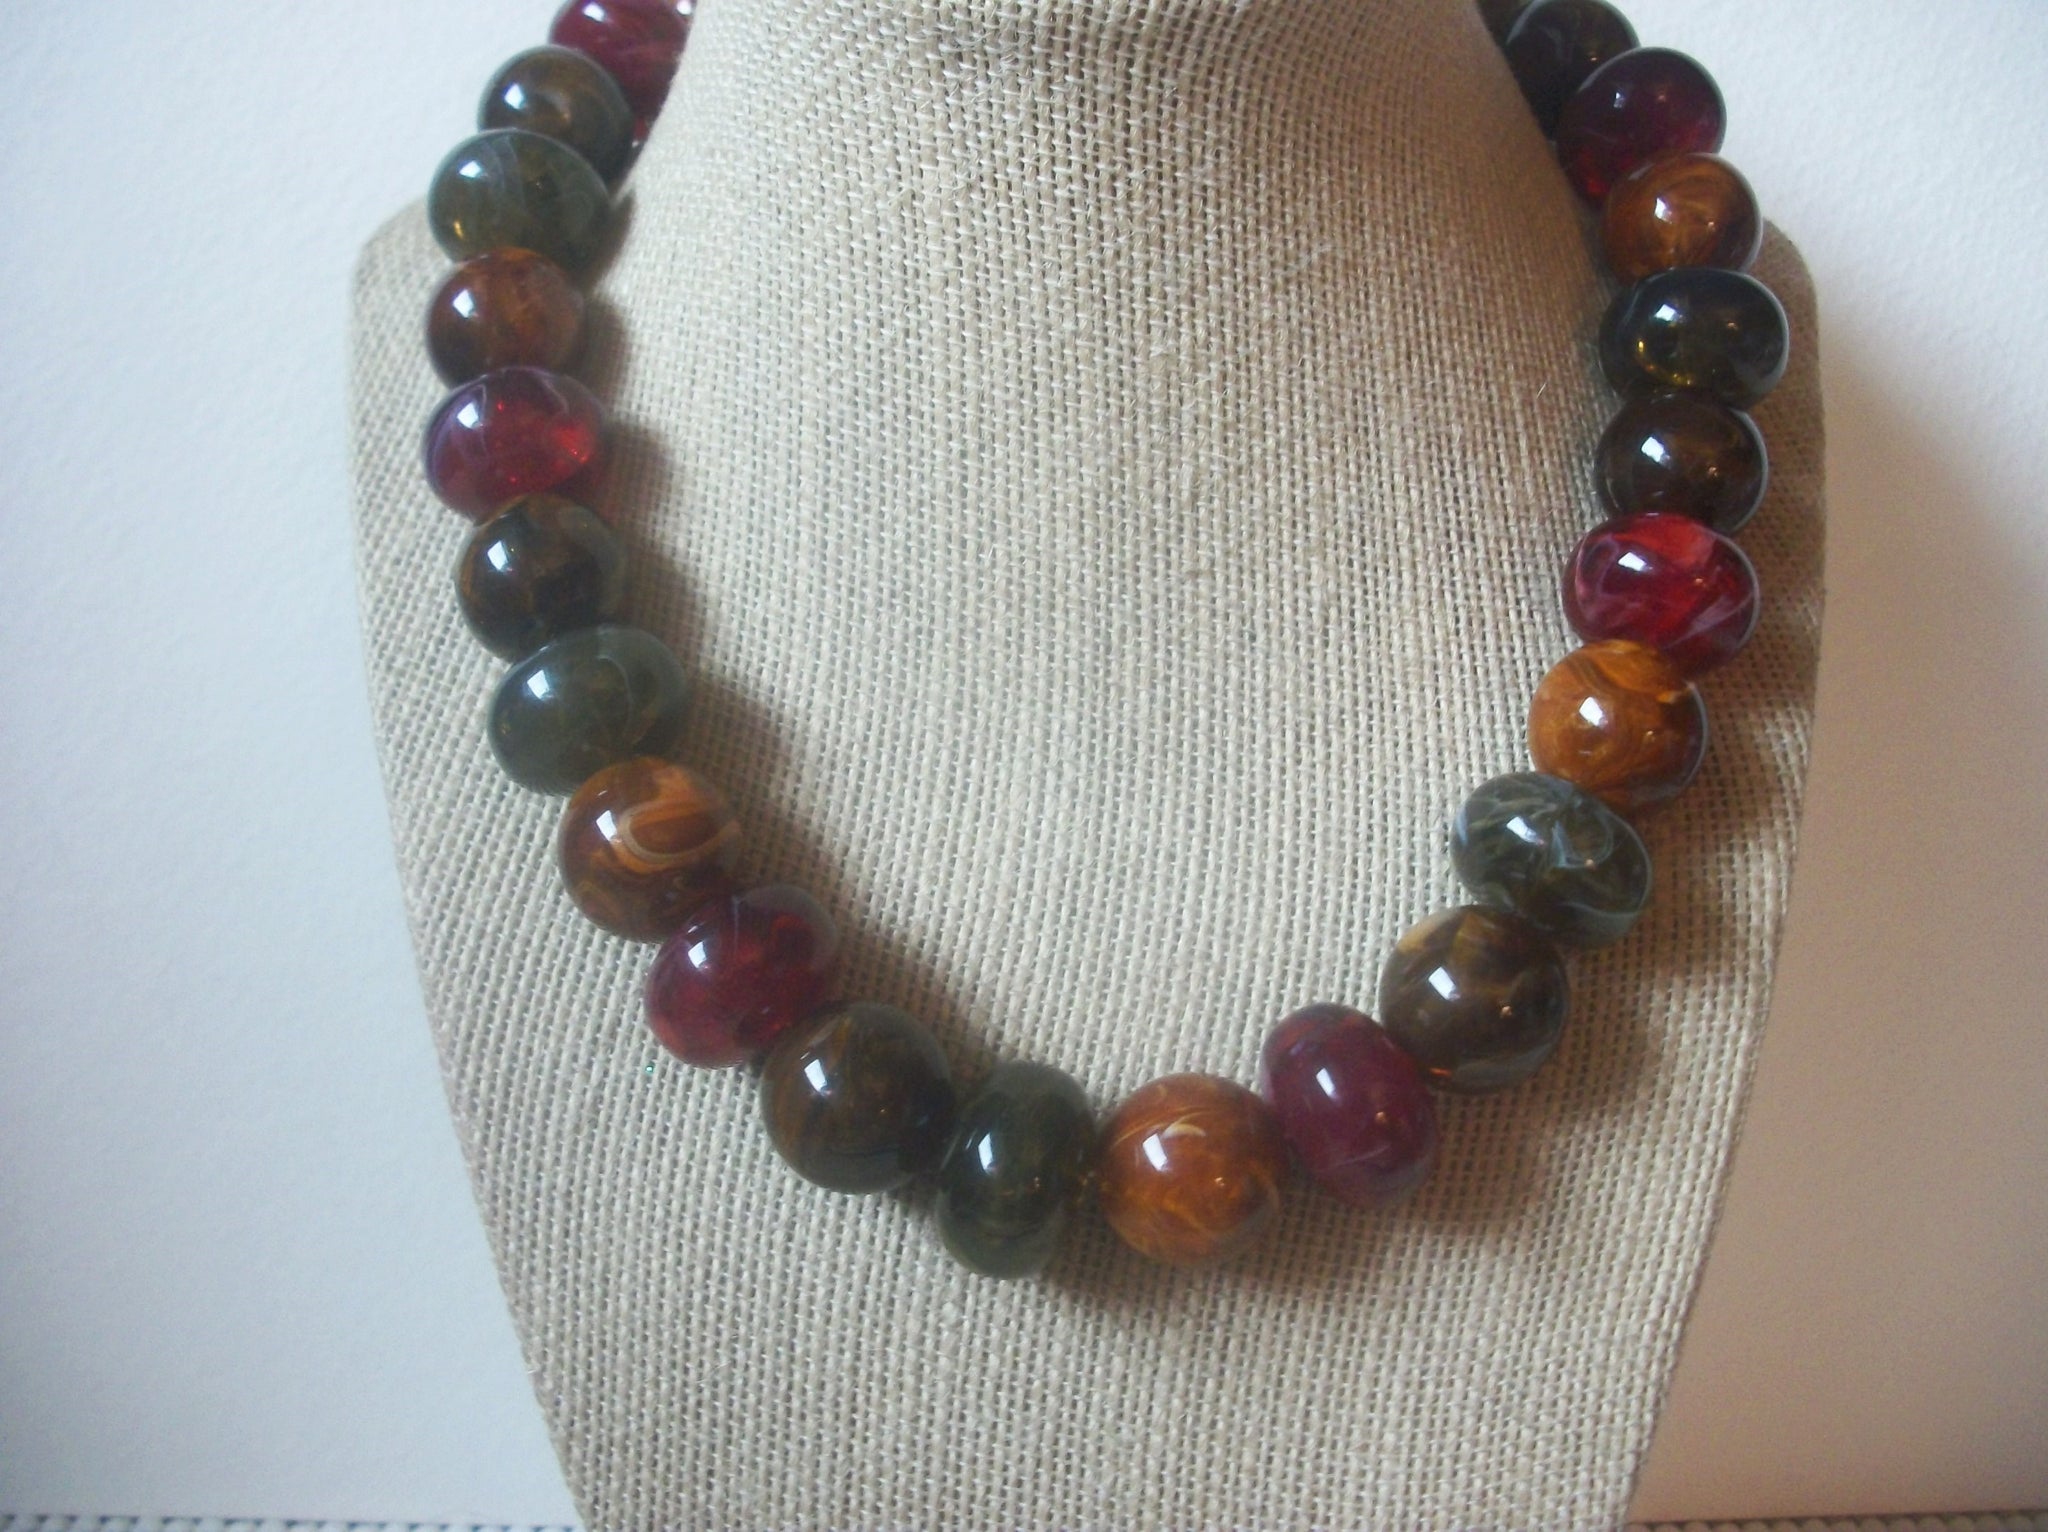 Vintage Jewelry, 17 1/2" - 20 1/2" Long, Marbleized Fall Tones, Acrylic Beads, Necklace 32517